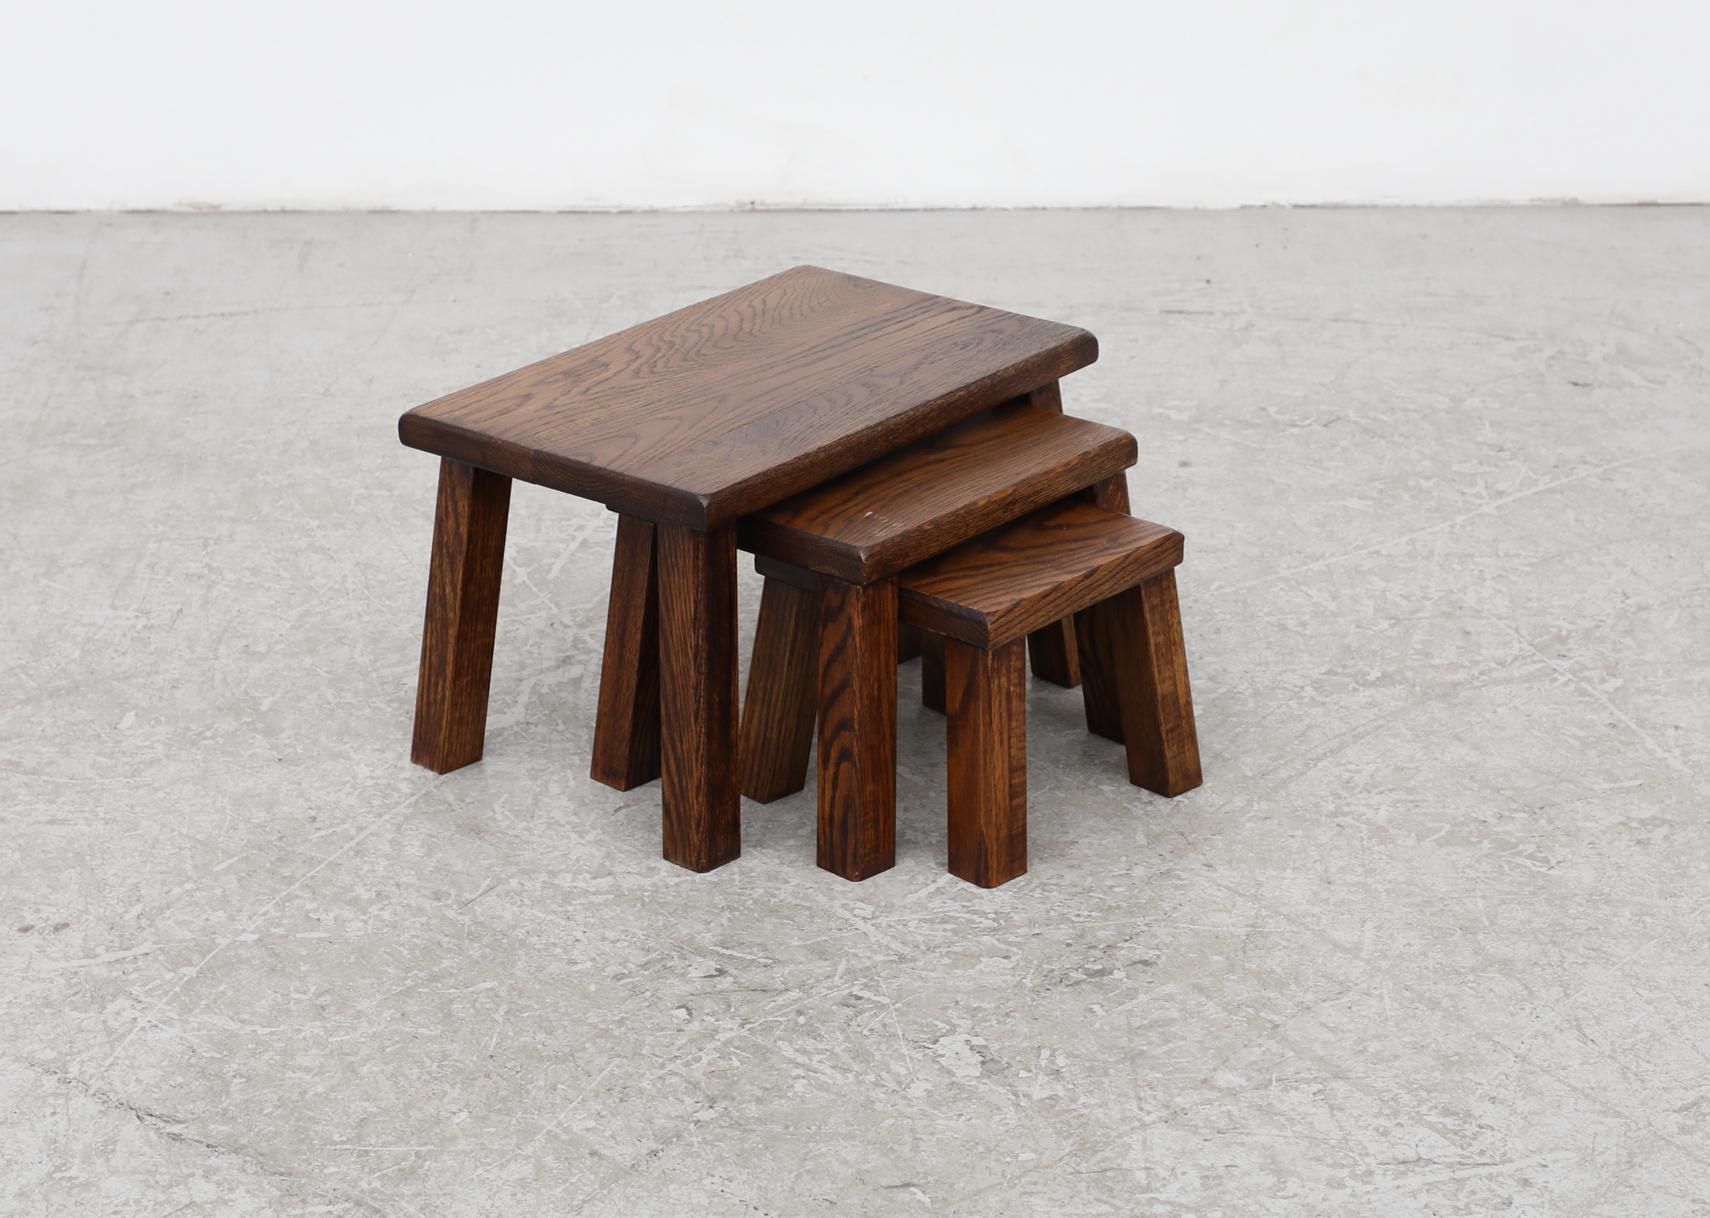 Thick set of 3 Brutalist dark oak nesting tables with thick tops and fat square angled legs. In original condition with visible wear and patina consistent with their age and use.